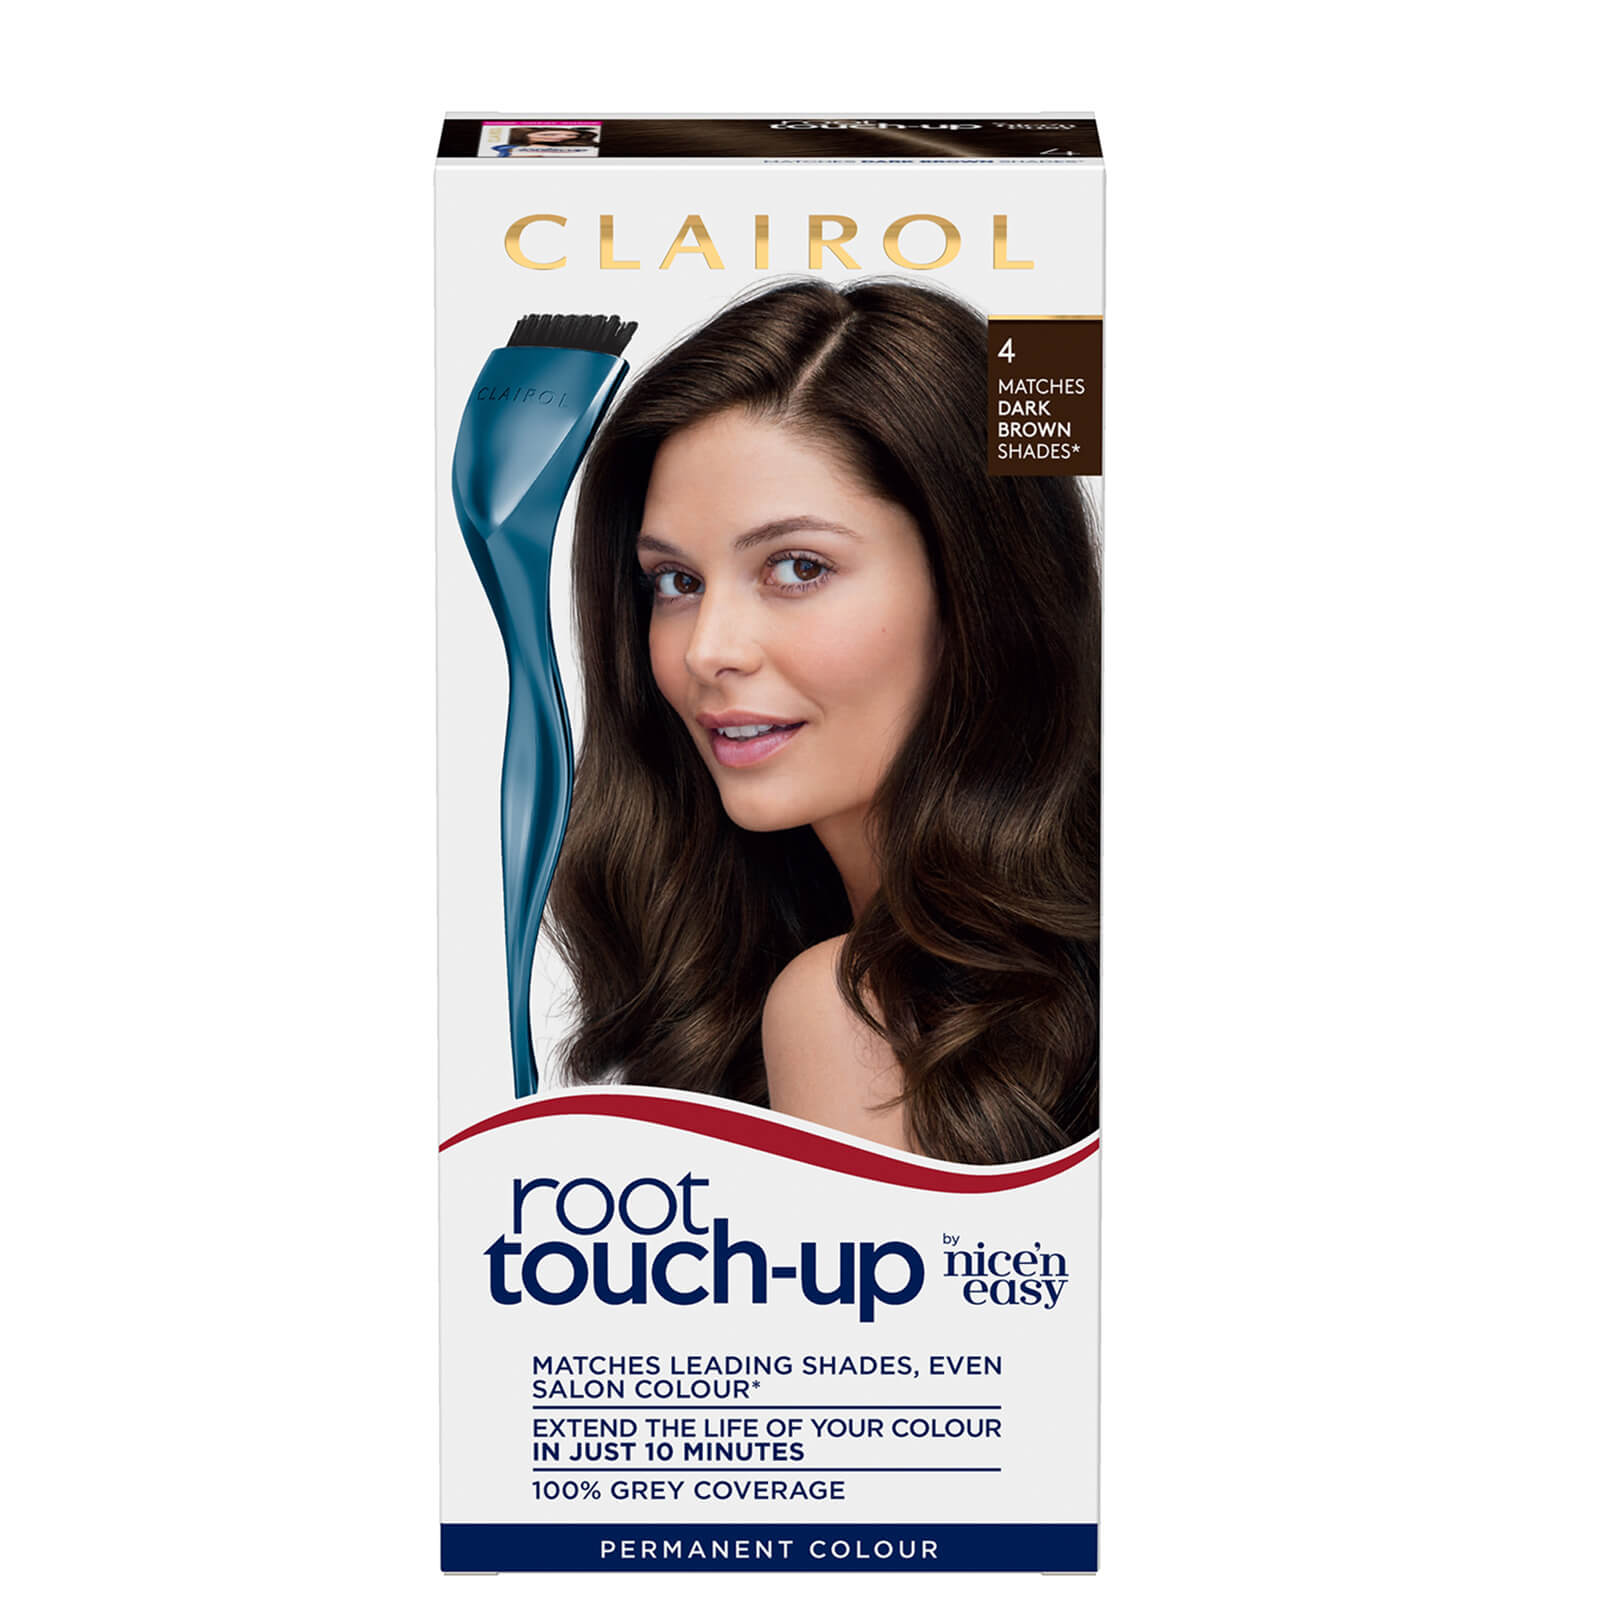 Clairol Root Touch-Up Permanent Hair Dye Long-lasting Intensifying Colour with Full Coverage 30ml (Various Shades) - 4 Dark Brown